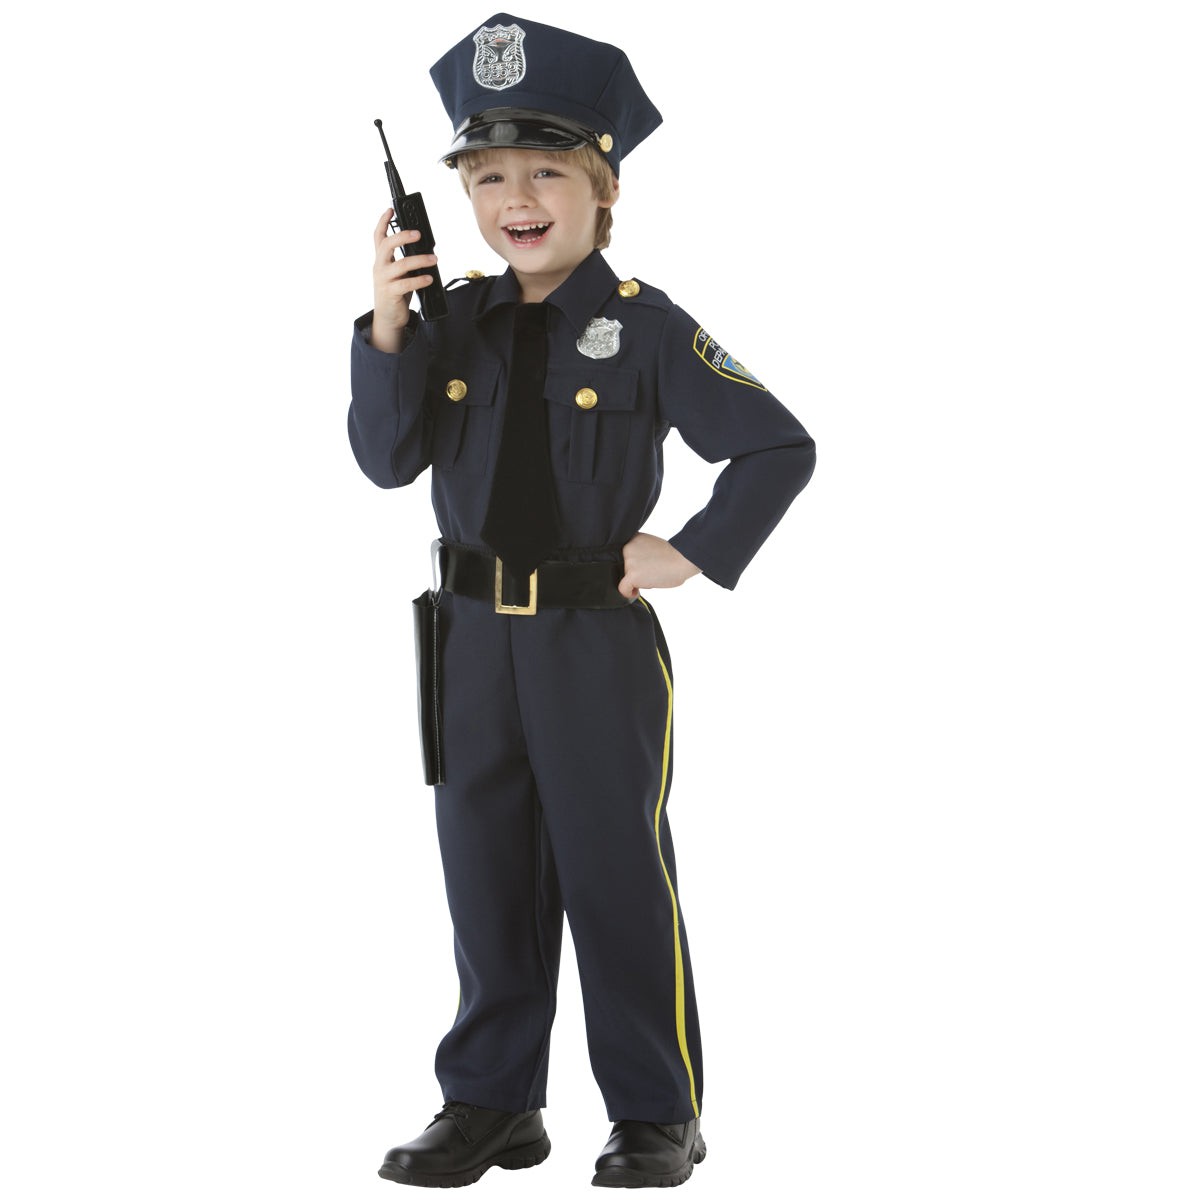 SUIT YOURSELF COSTUME CO. Costumes Police Officer Costume for Kids, Blue and Black Jumpsuit